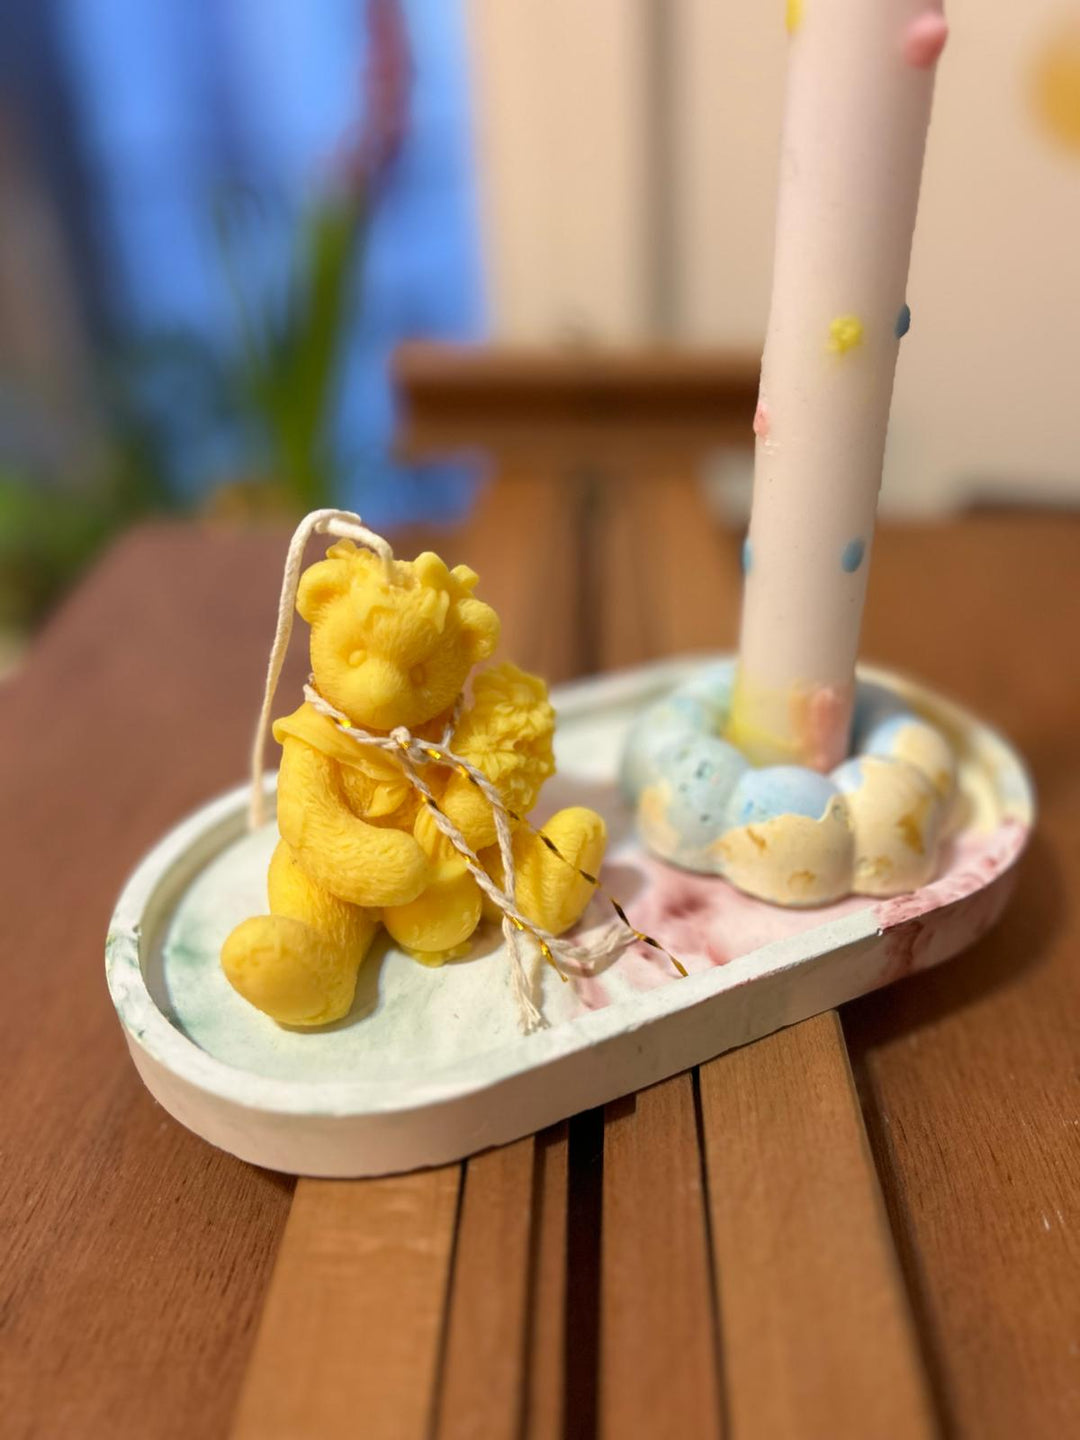 Teddy Bear Candle available in yellow and light pink